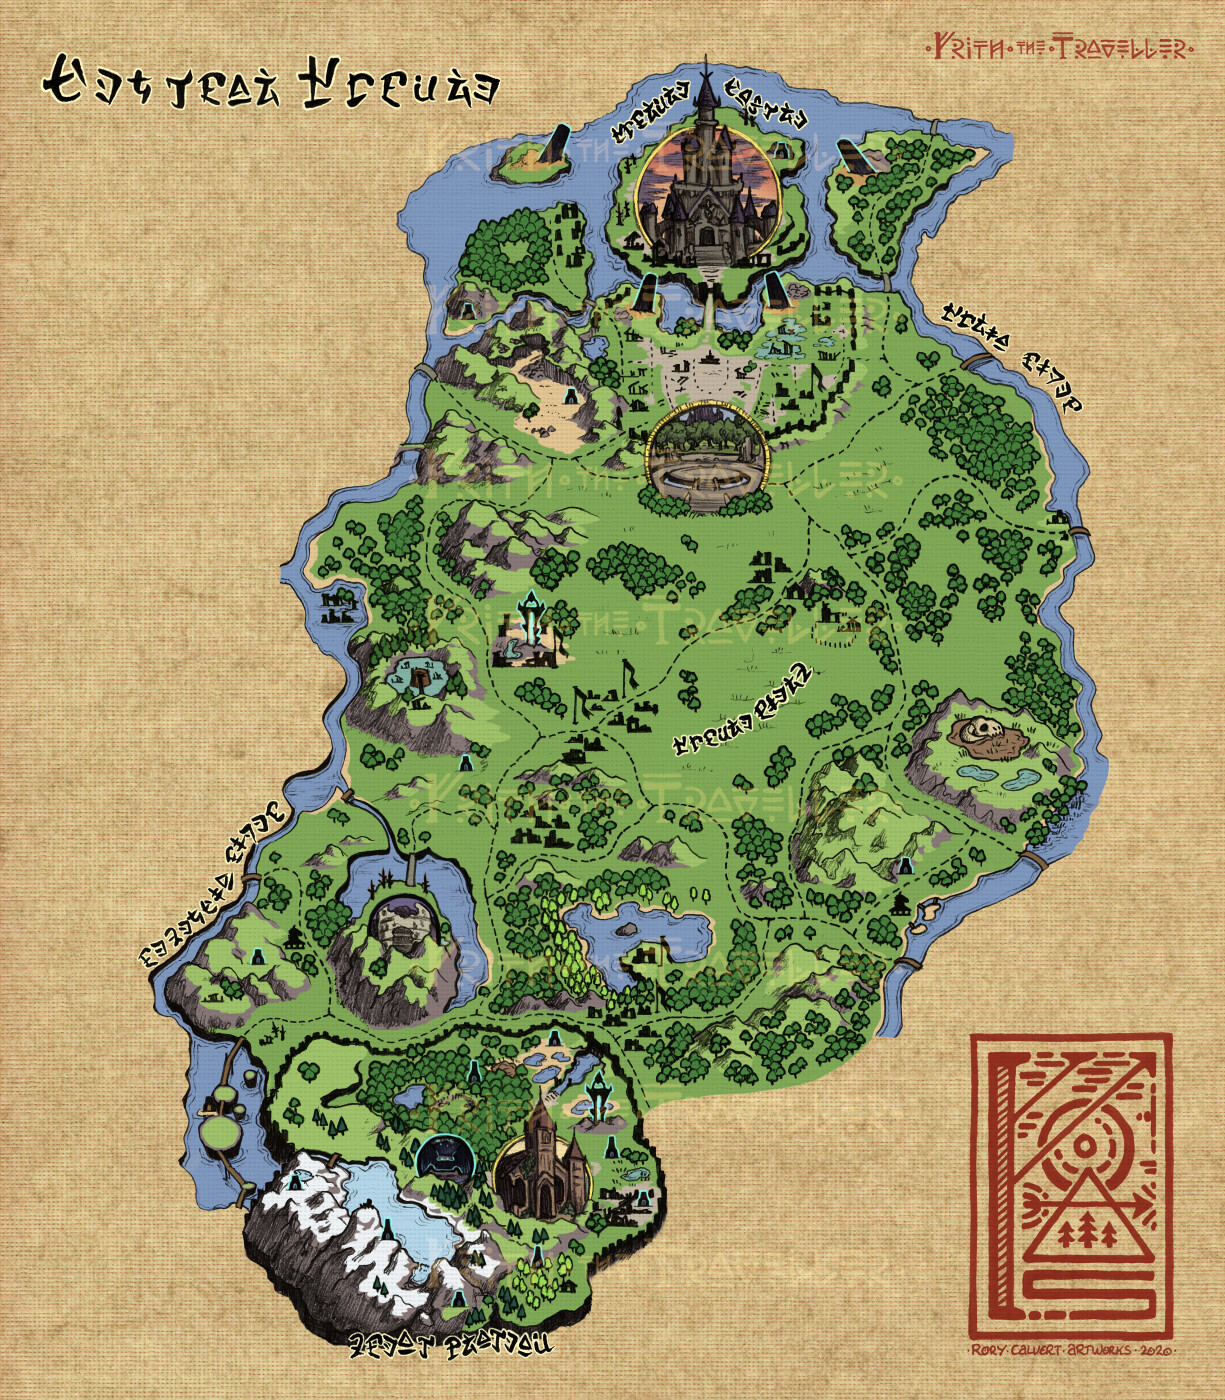 Fan Recreates Breath of the Wild's Map in Classic RPG Style